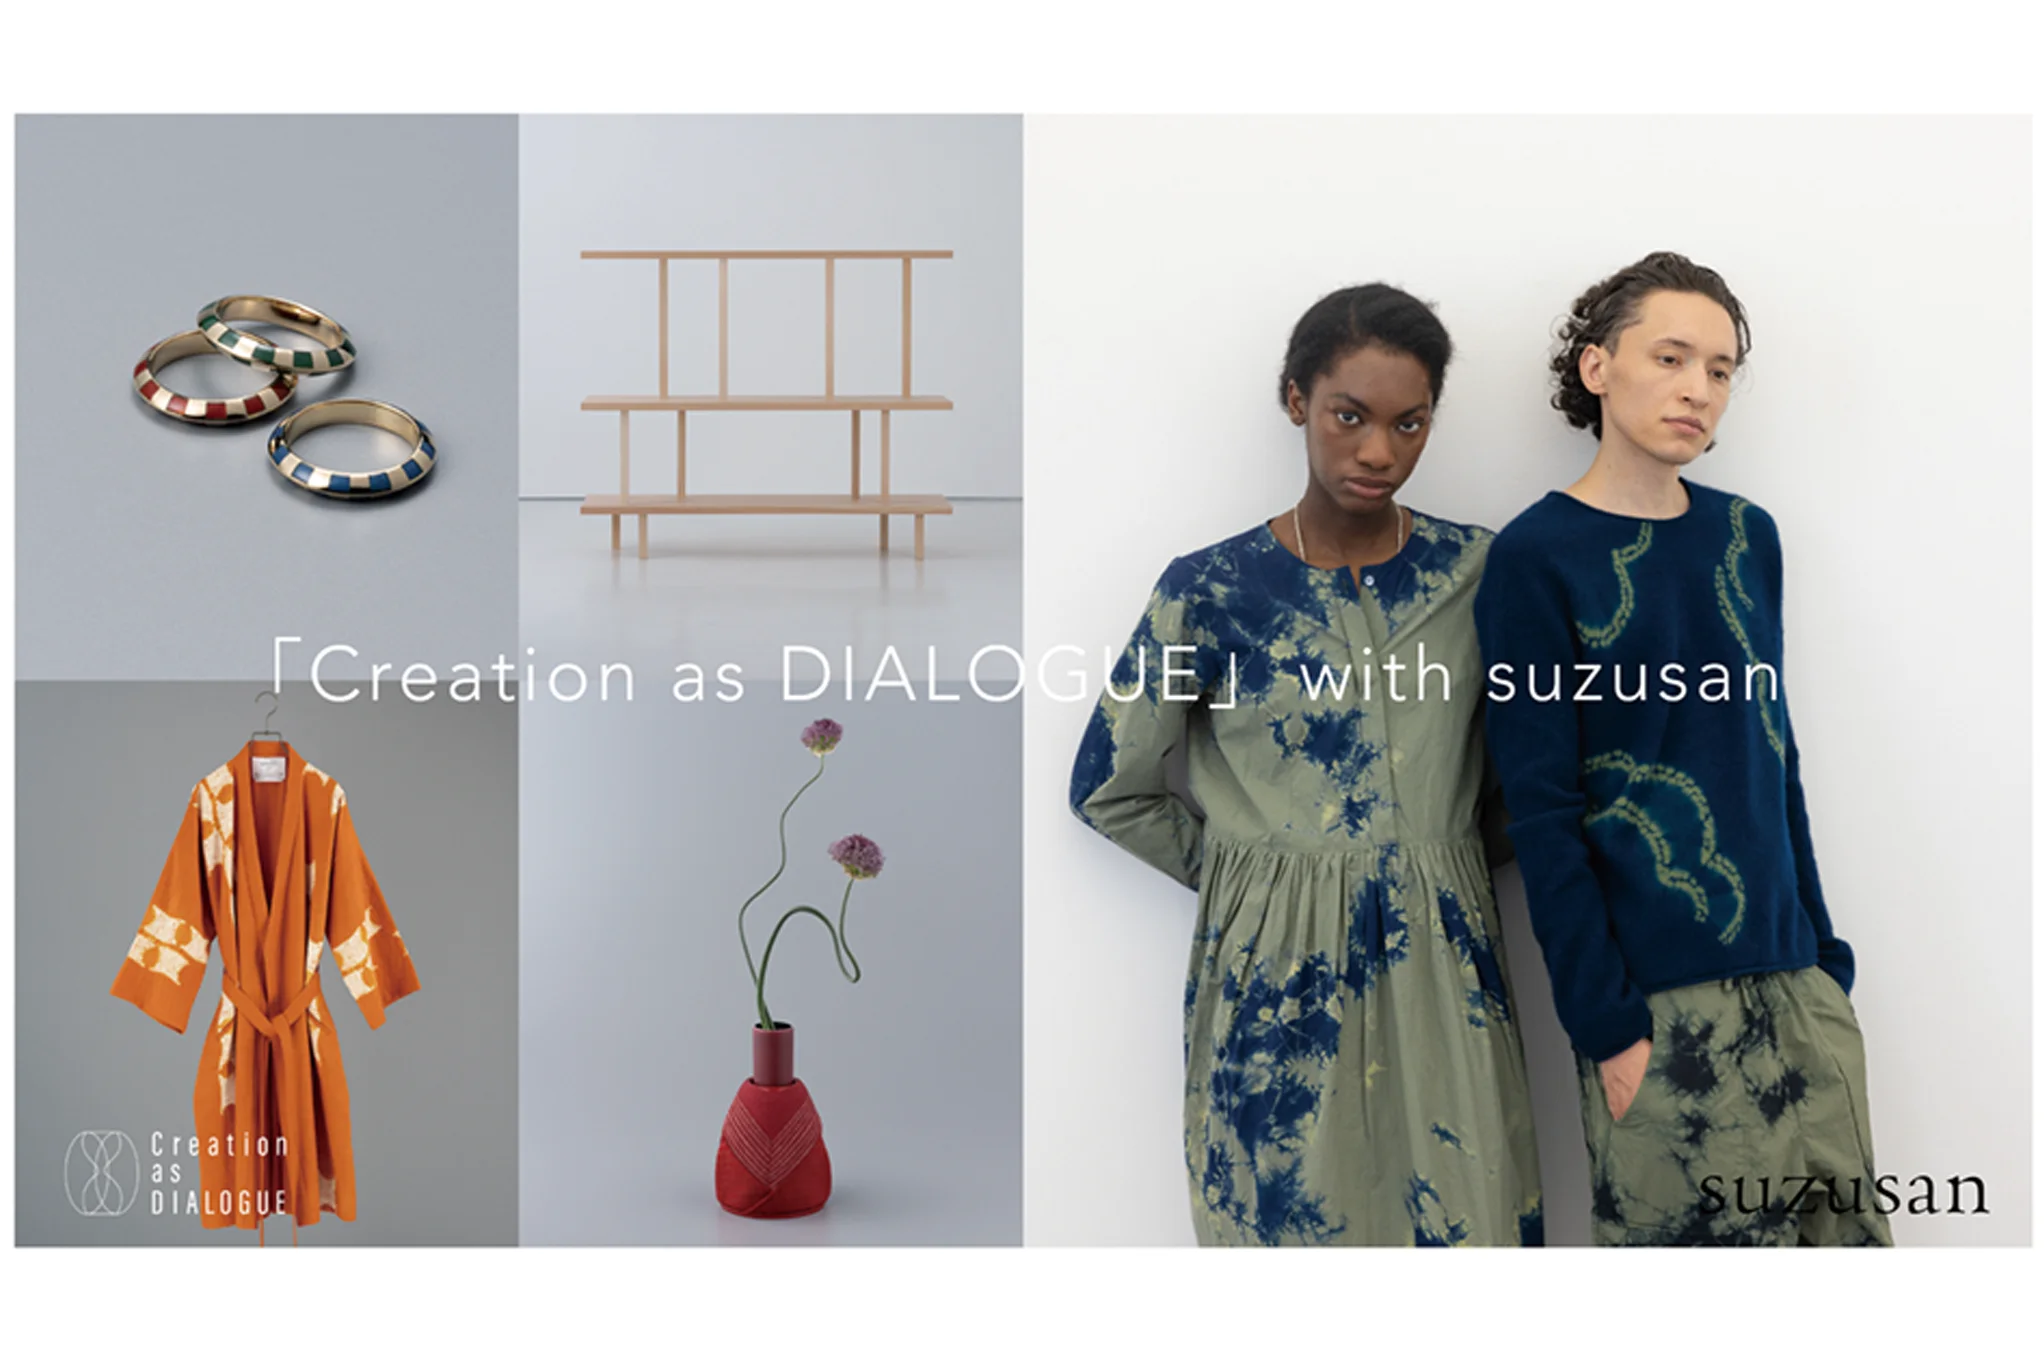 Special POP-UP Project ①. "Creation as DIALOGUE with suzusan